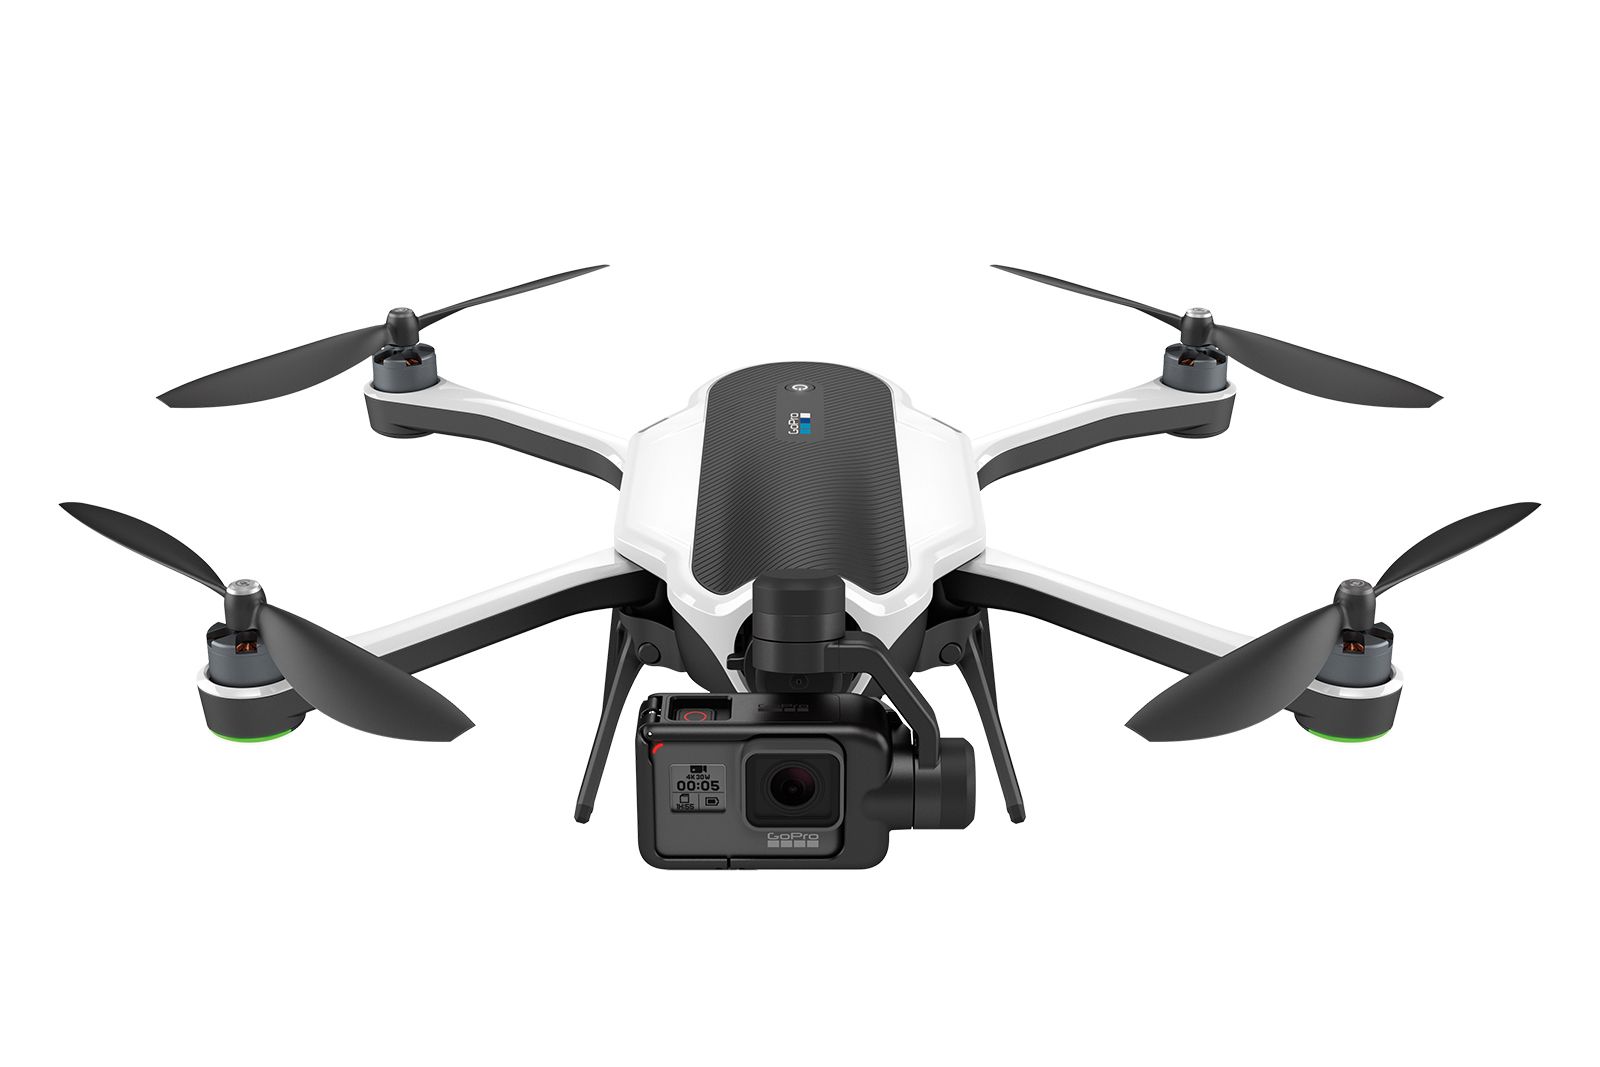 gopro s karma drone is official takes flight soon image 1